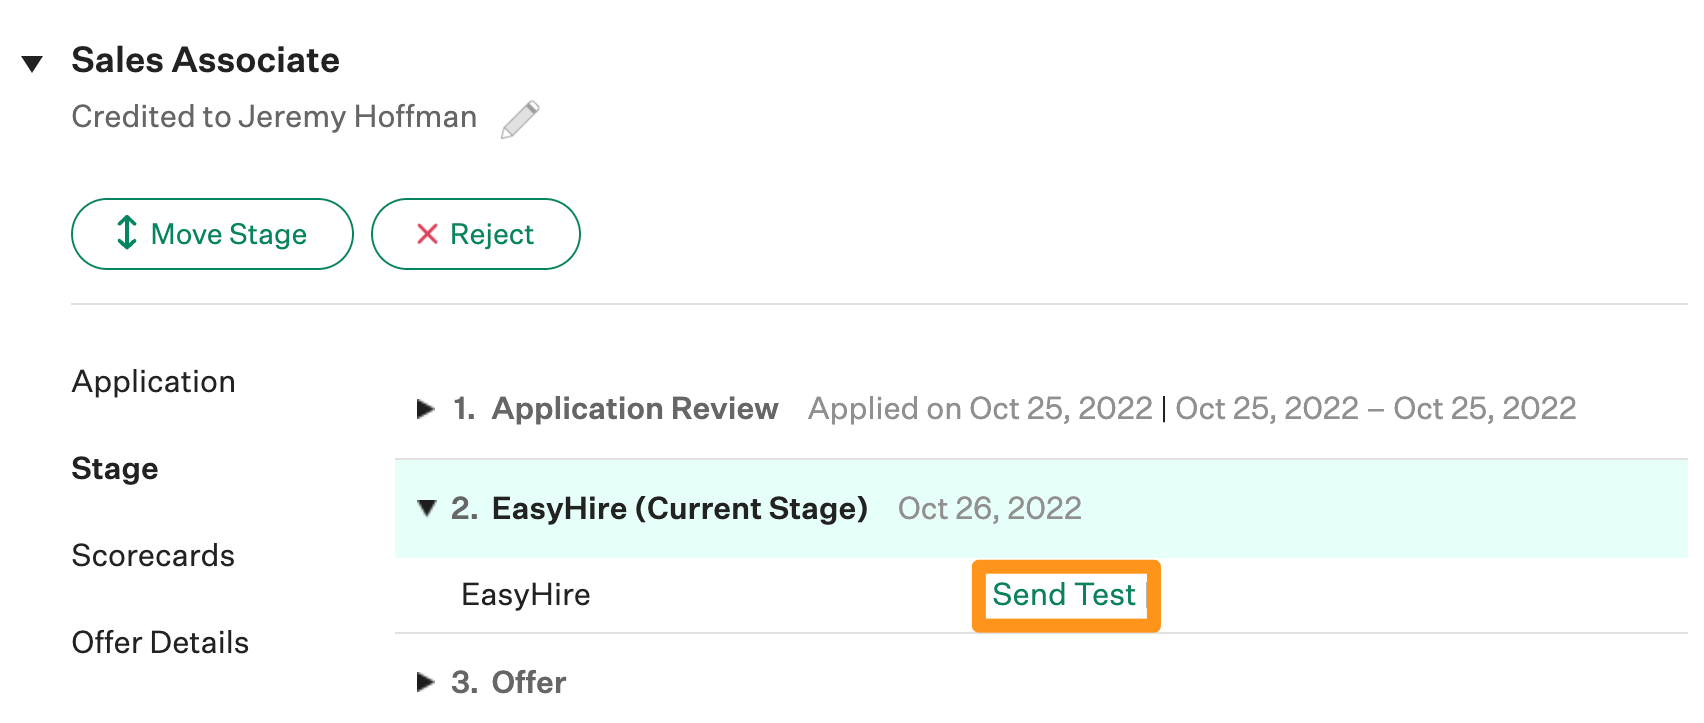 Send test button highlighted in marigold on candidate profile.png